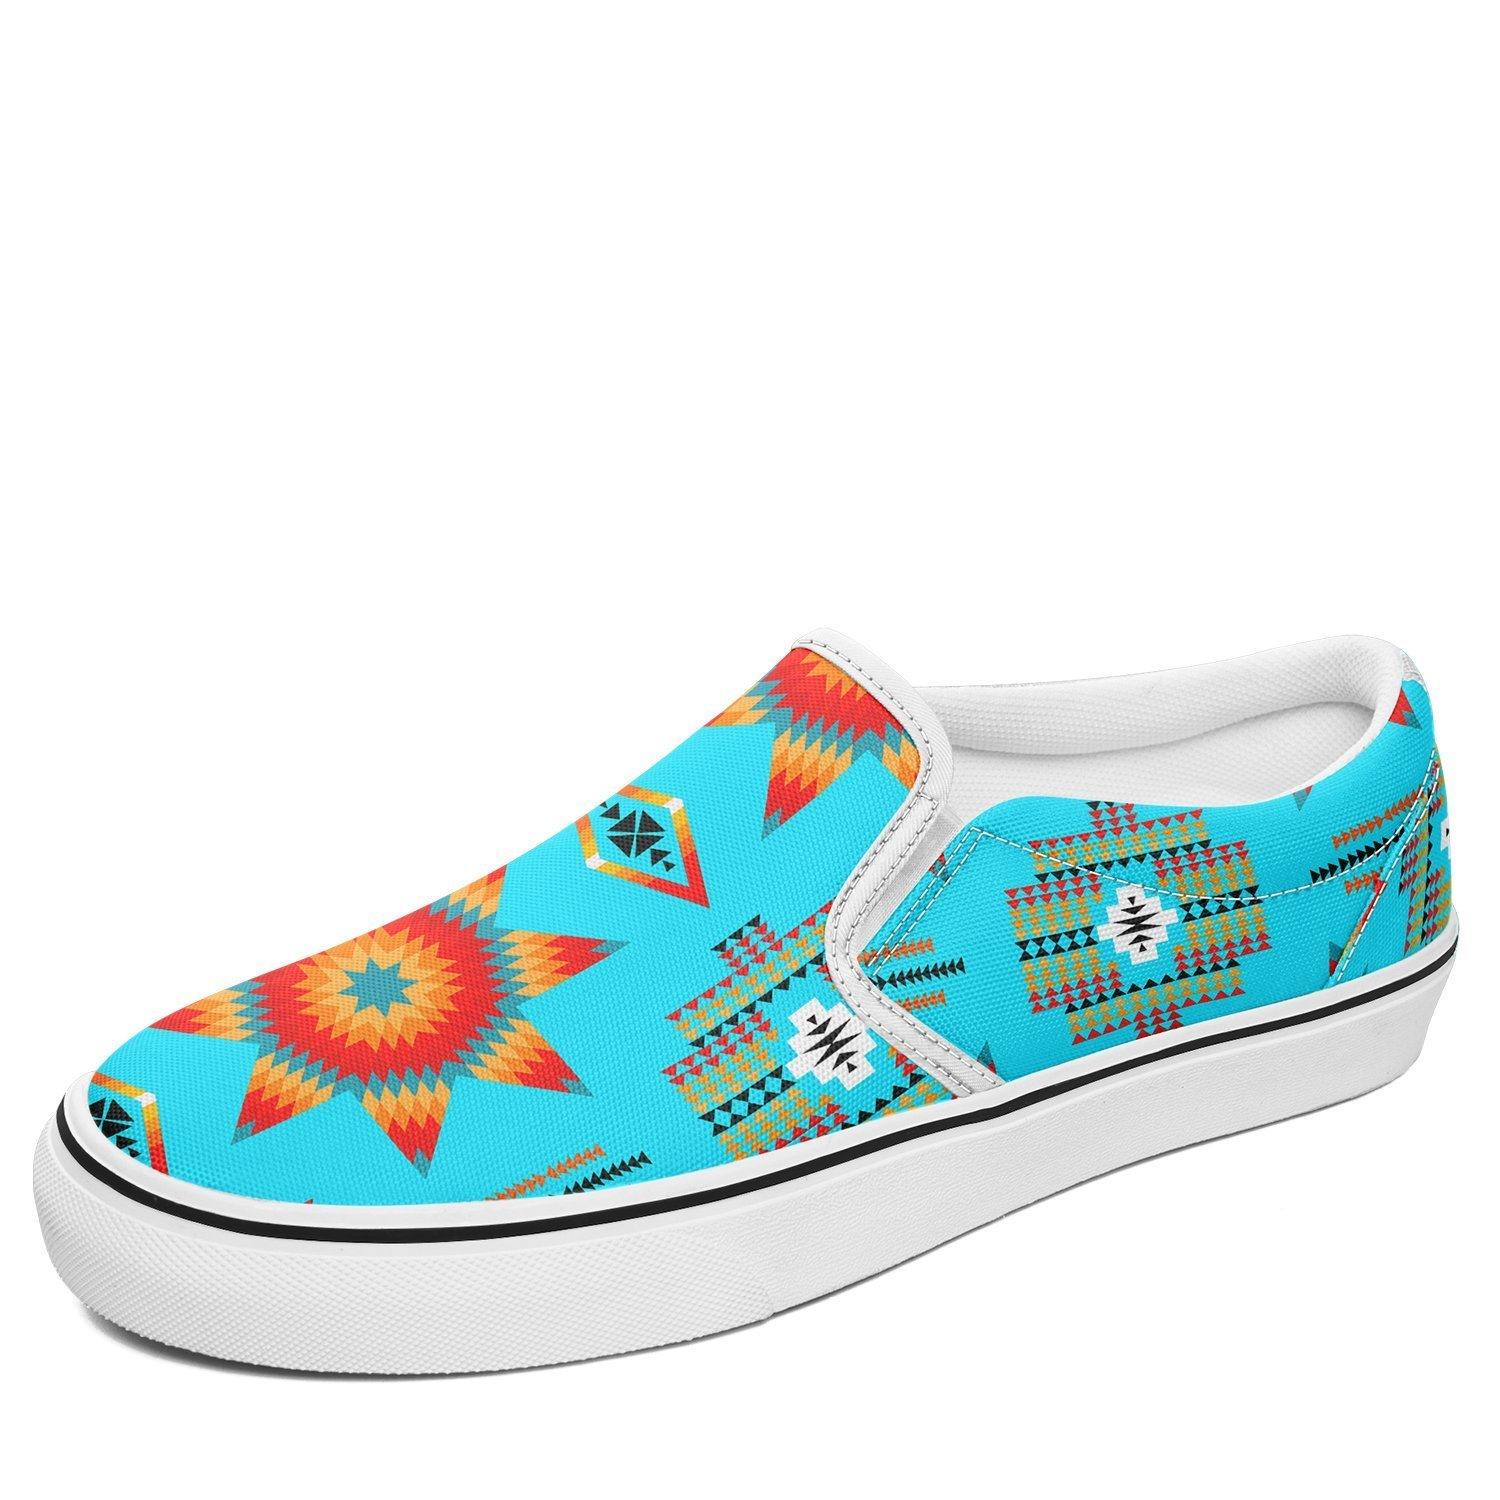 Rising Star Harvest Moon Otoyimm Kid's Canvas Slip On Shoes 49 Dzine US Youth 1 / EUR 32 White Sole 